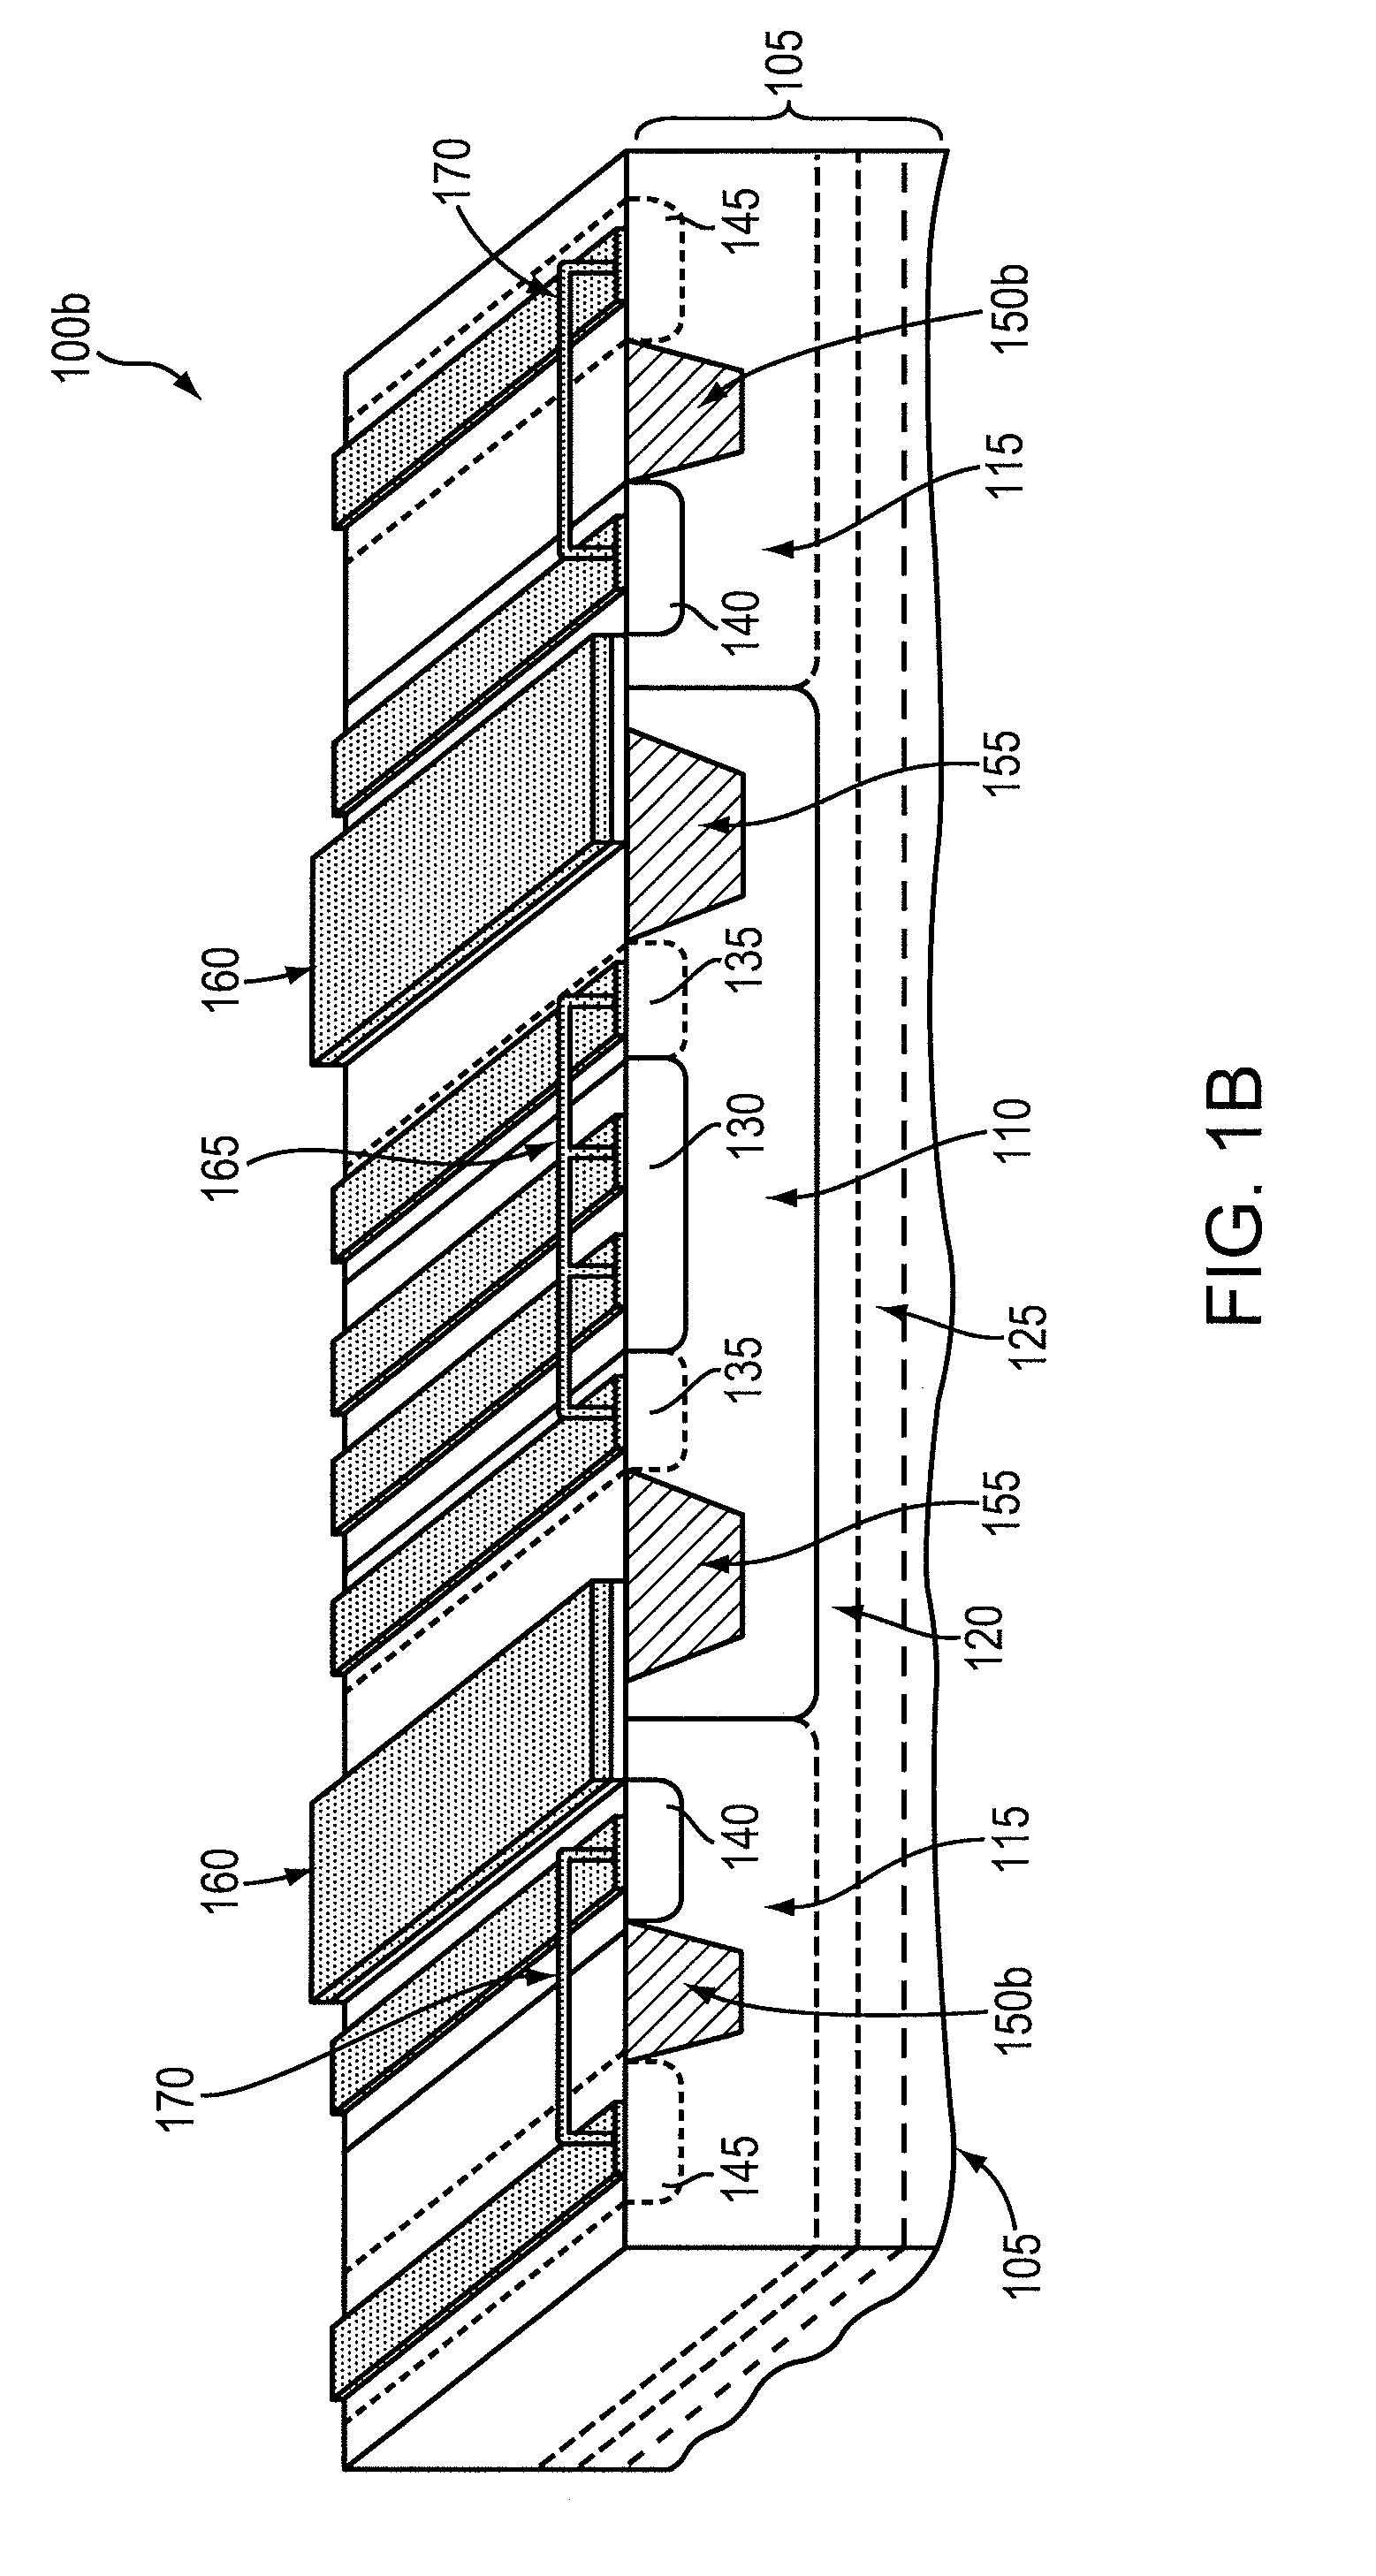 Bond pad with integrated transient over-voltage protection